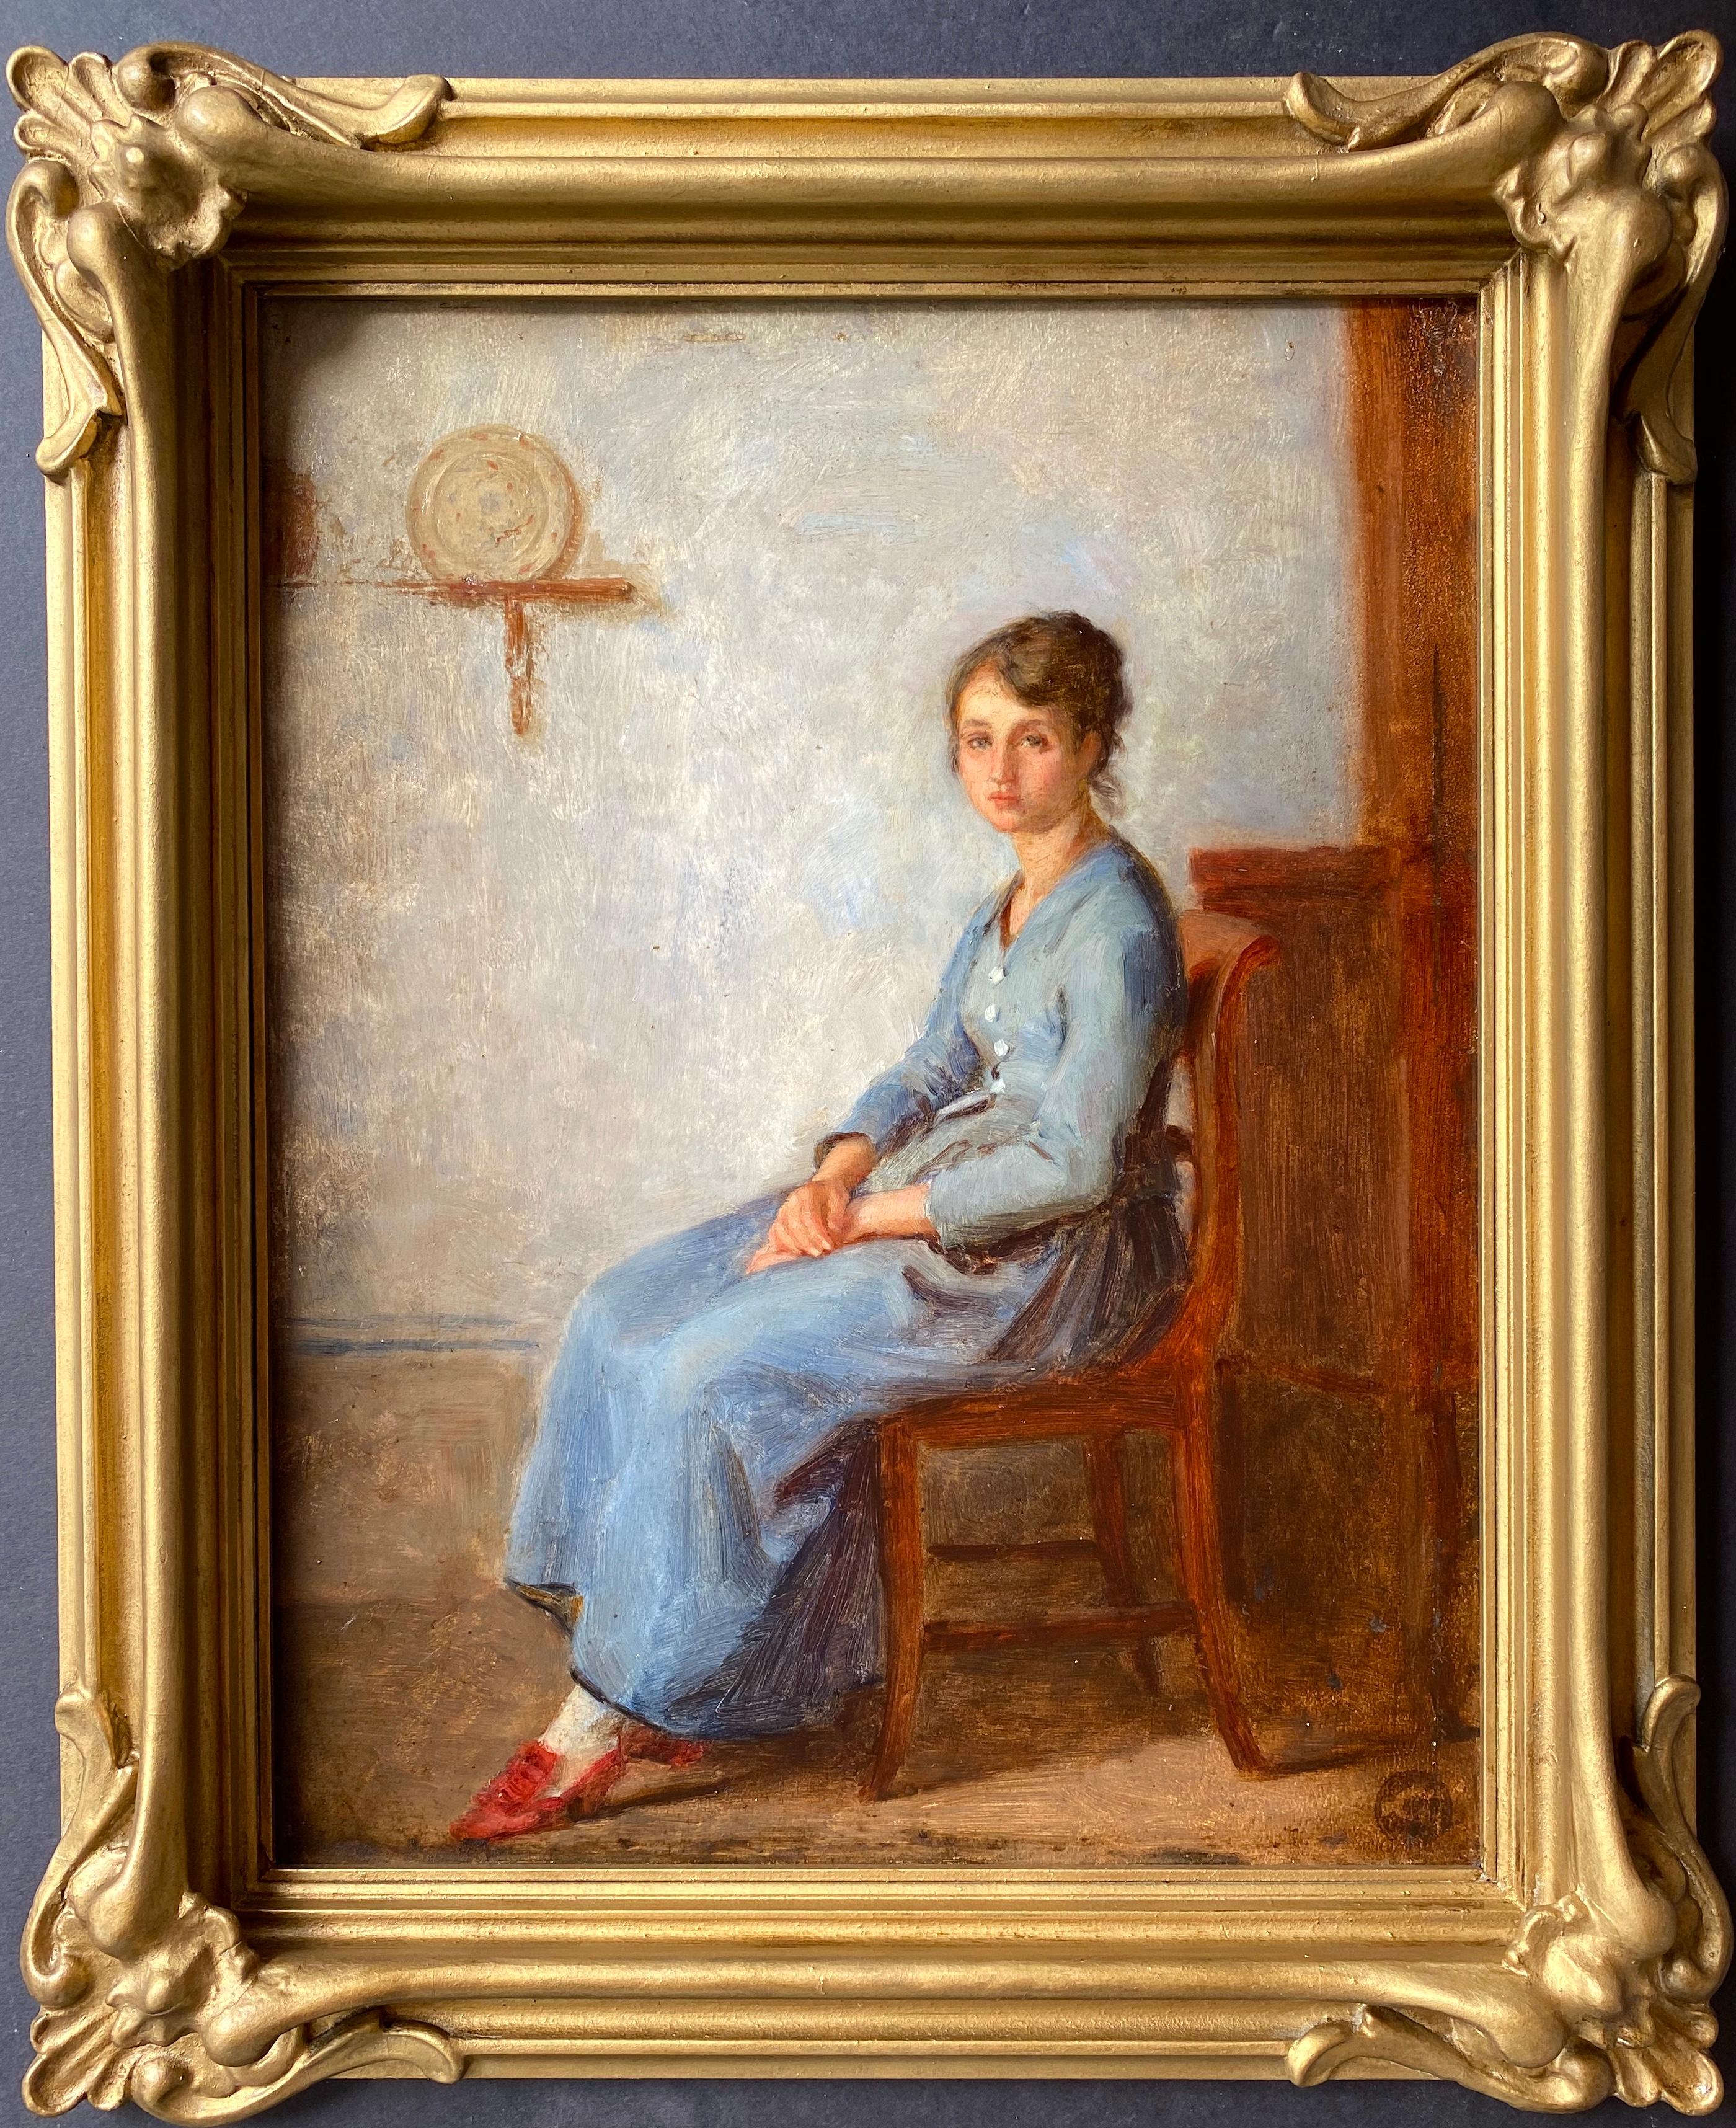 “A French Nurse” - Painting by Pierre Edouard Frere